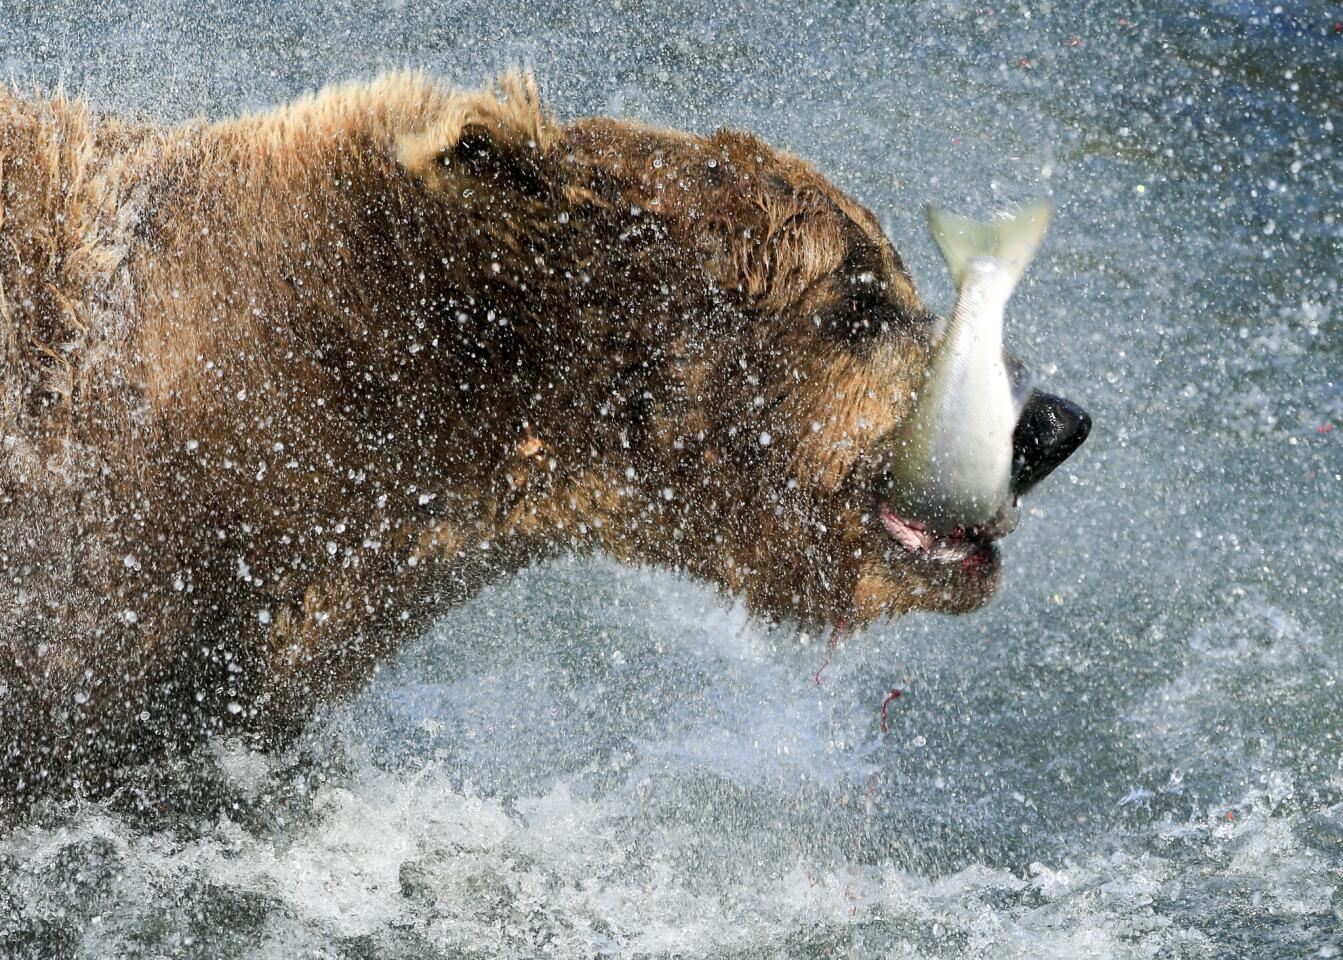 A coastal brown bear shakes the water from his fur while he carries a sockeye salmon out of the water. Each bear is likely to consume about 20 of the high calorie salmon per day to prepare for their long hibernation.